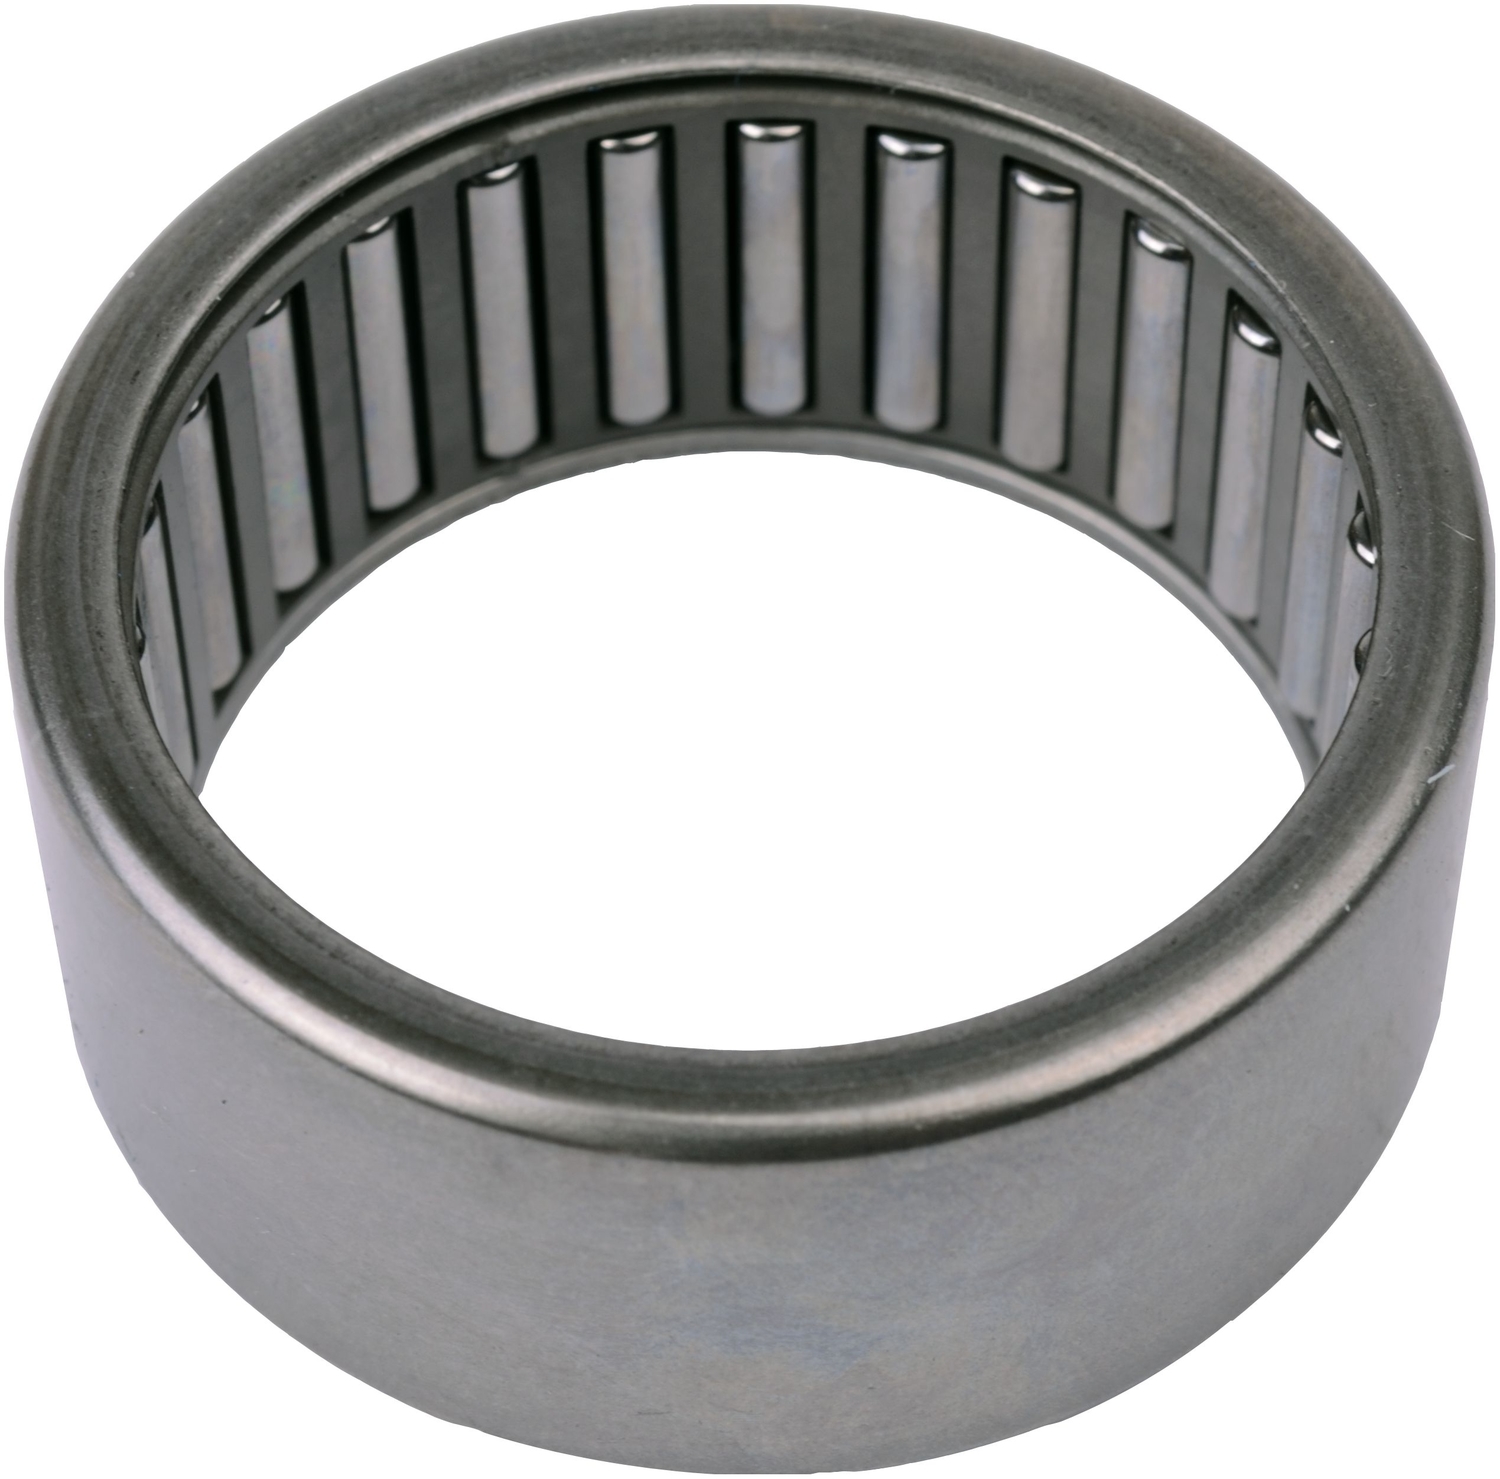 SKF (CHICAGO RAWHIDE) - Axle Spindle Bearing - SKF HK3016 VP